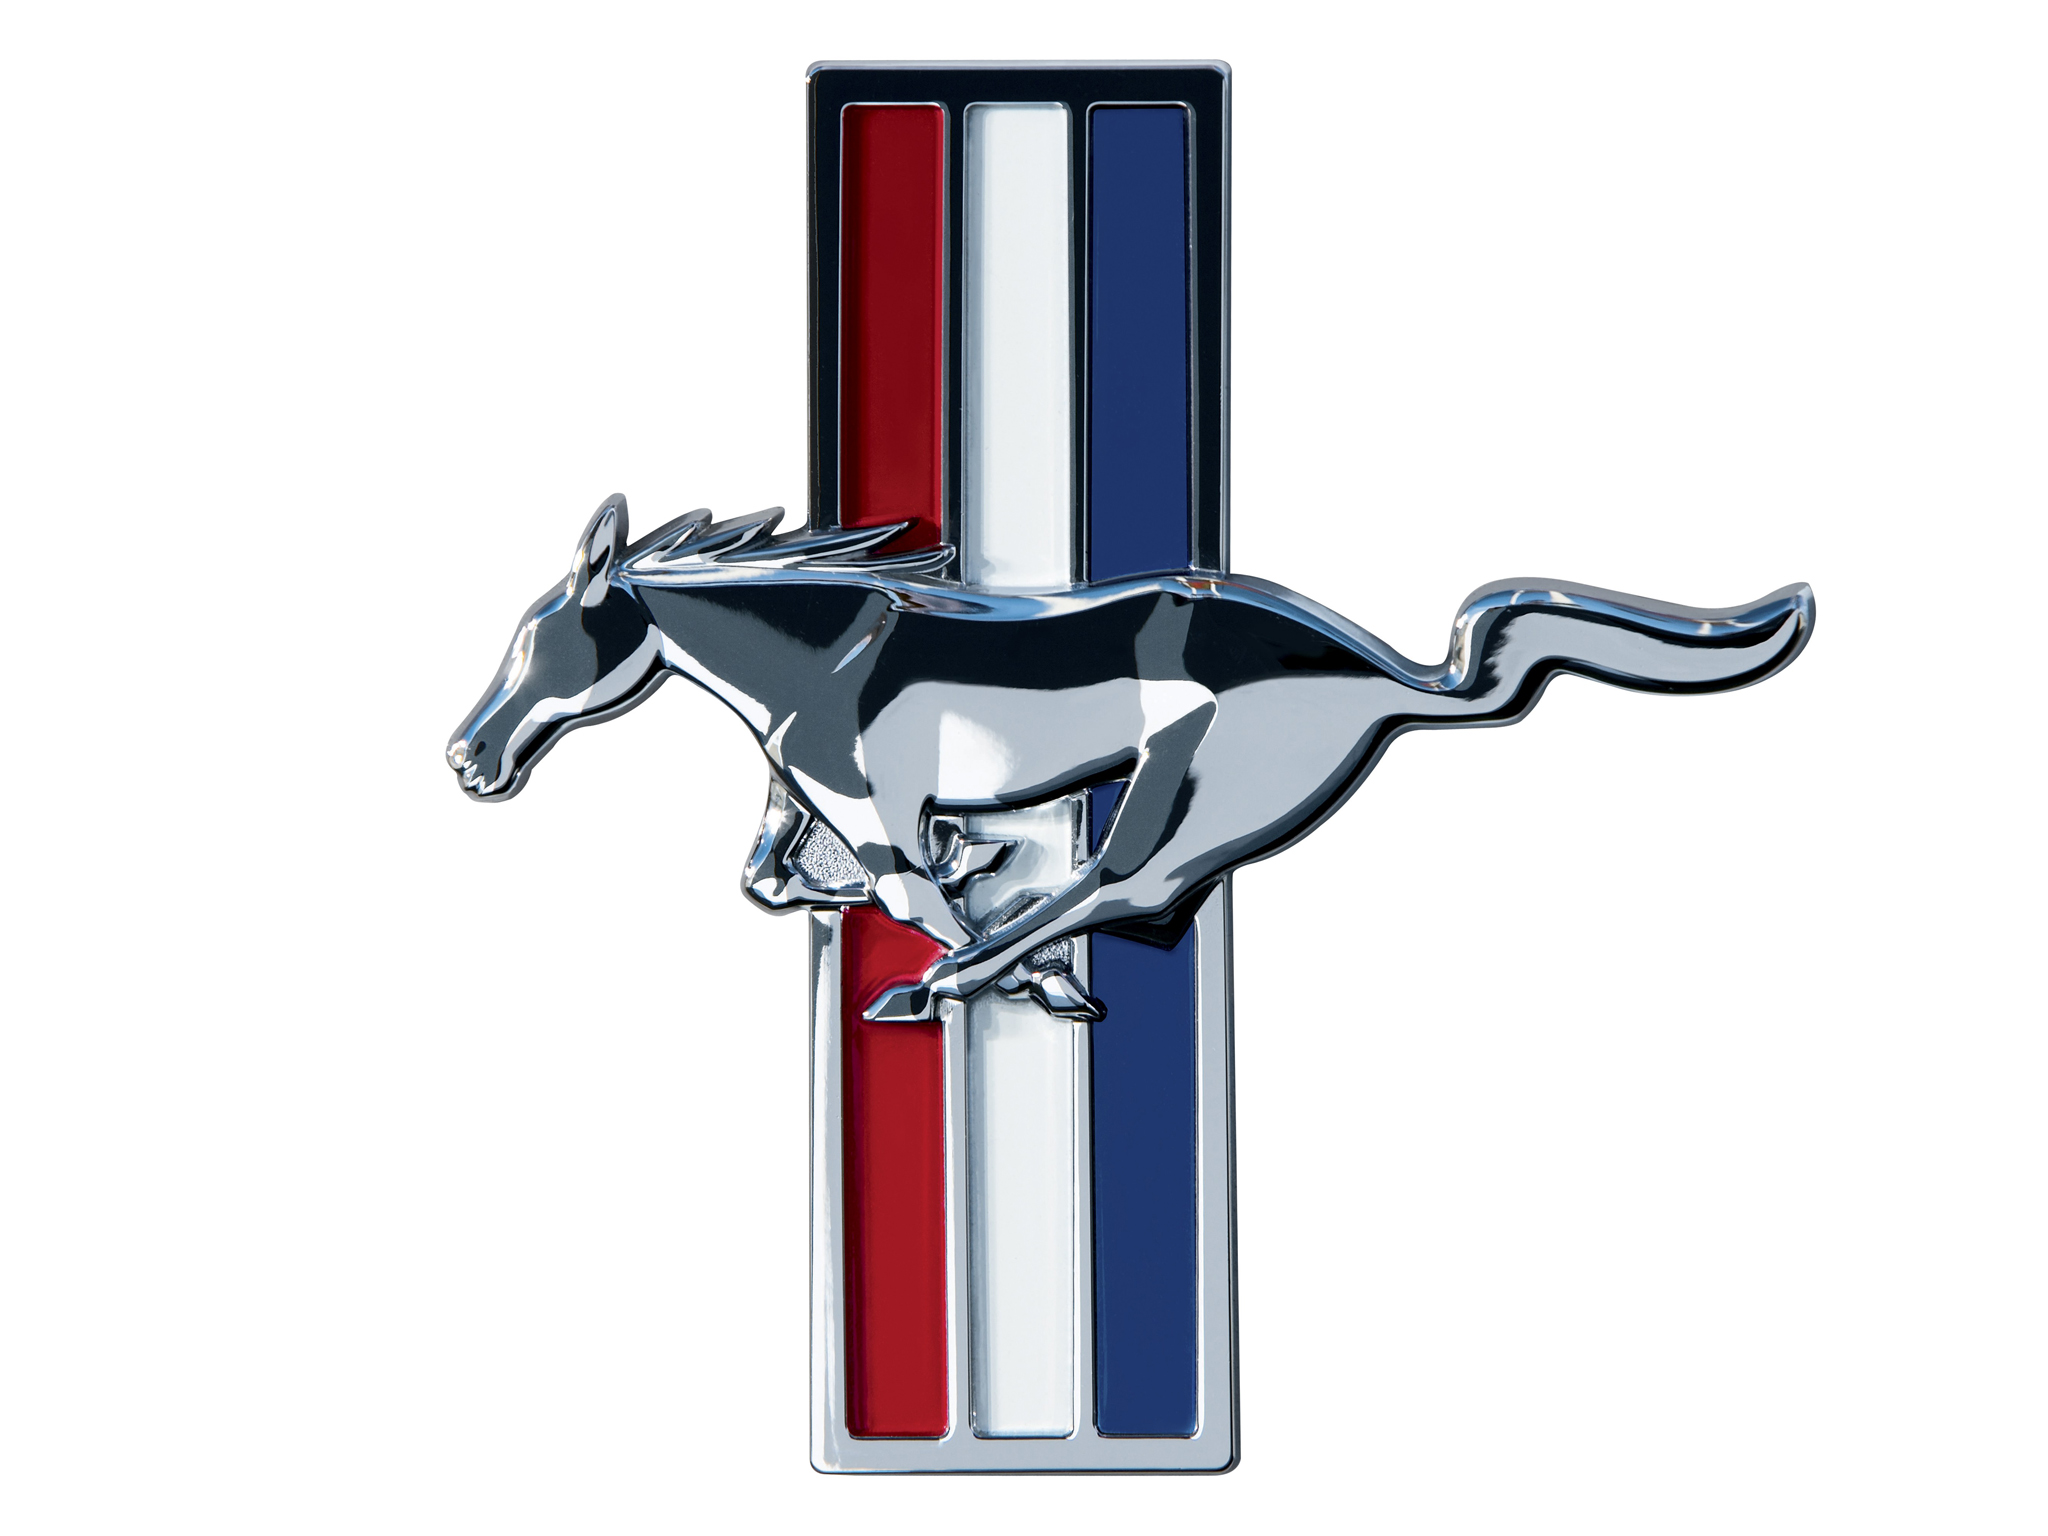 Ford Mustang Computer Wallpapers Desktop Backgrounds 2048x1536 ID 2048x1536